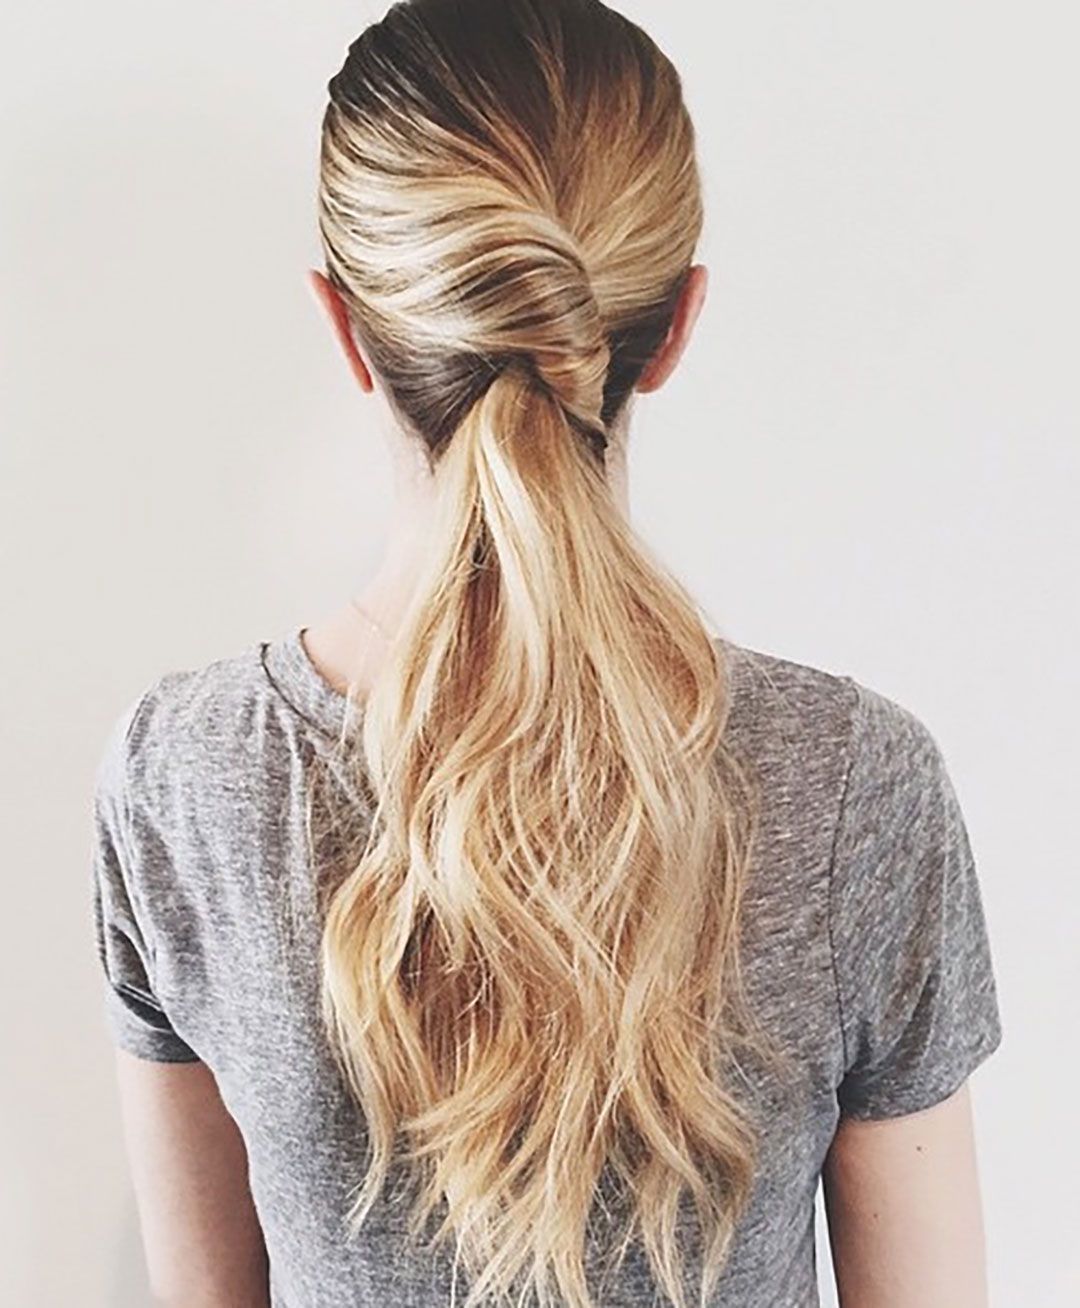 Ponytail Hairstyles  5 Easy Ponytail Looks For The Work Week -   12 hairstyles Wavy pony tails ideas